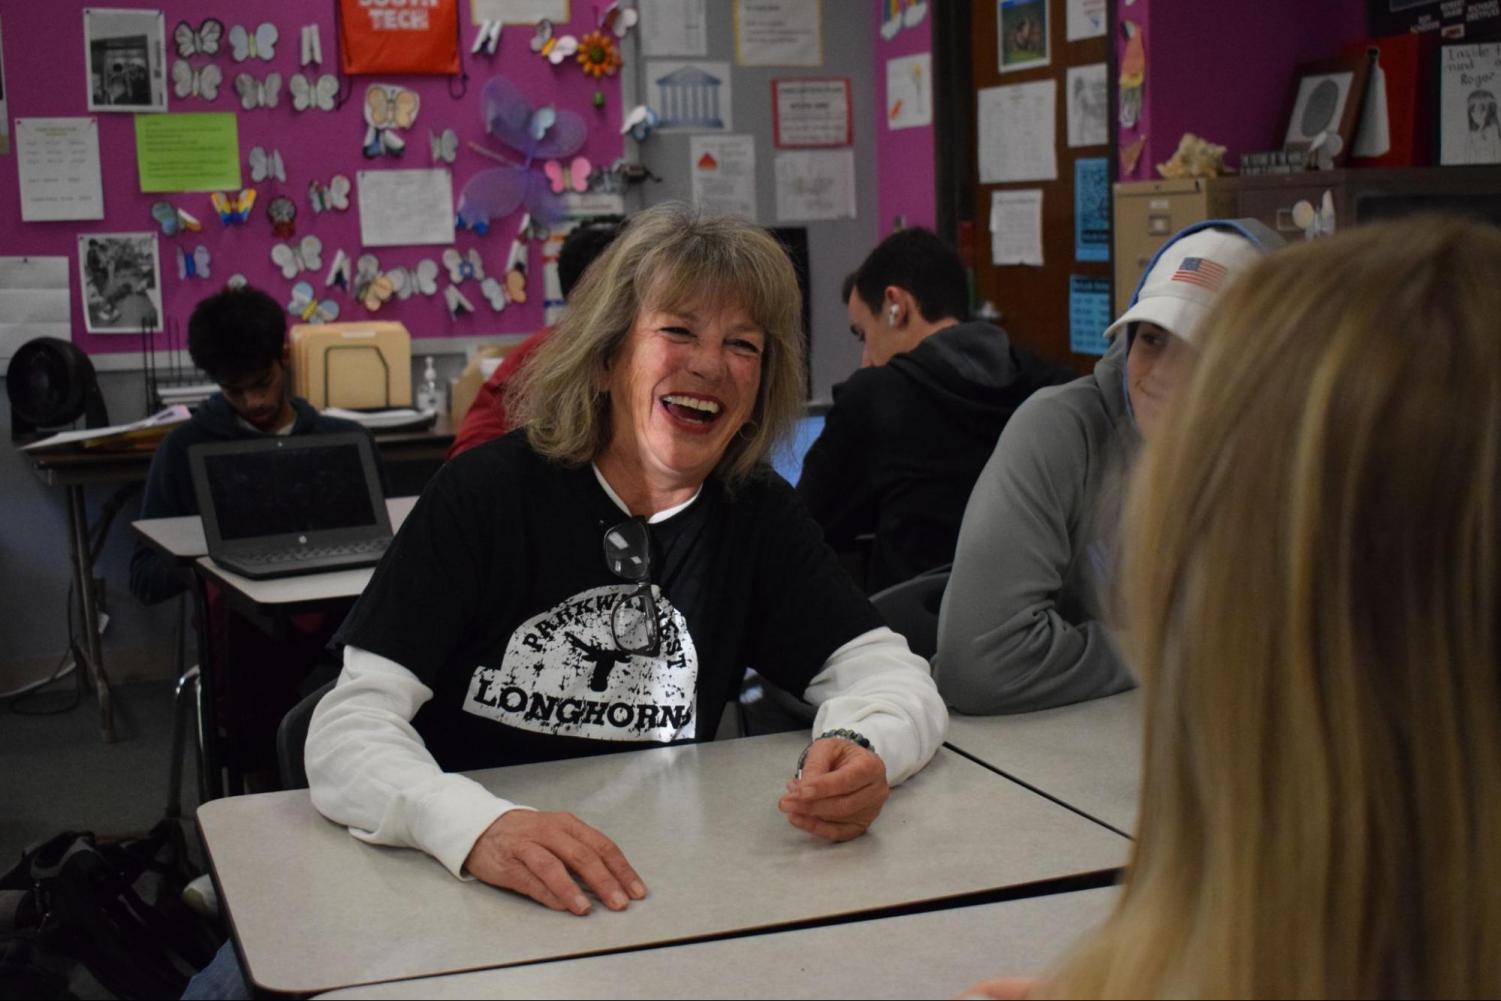 English teacher Angela Frye interacts with students. Frye discussed how movies could inspire students stories and related it to their current assignment in English 3 about categorizing types of people. “I always try to find ways to make school fun, and I want kids to enjoy my class,” Frye said.